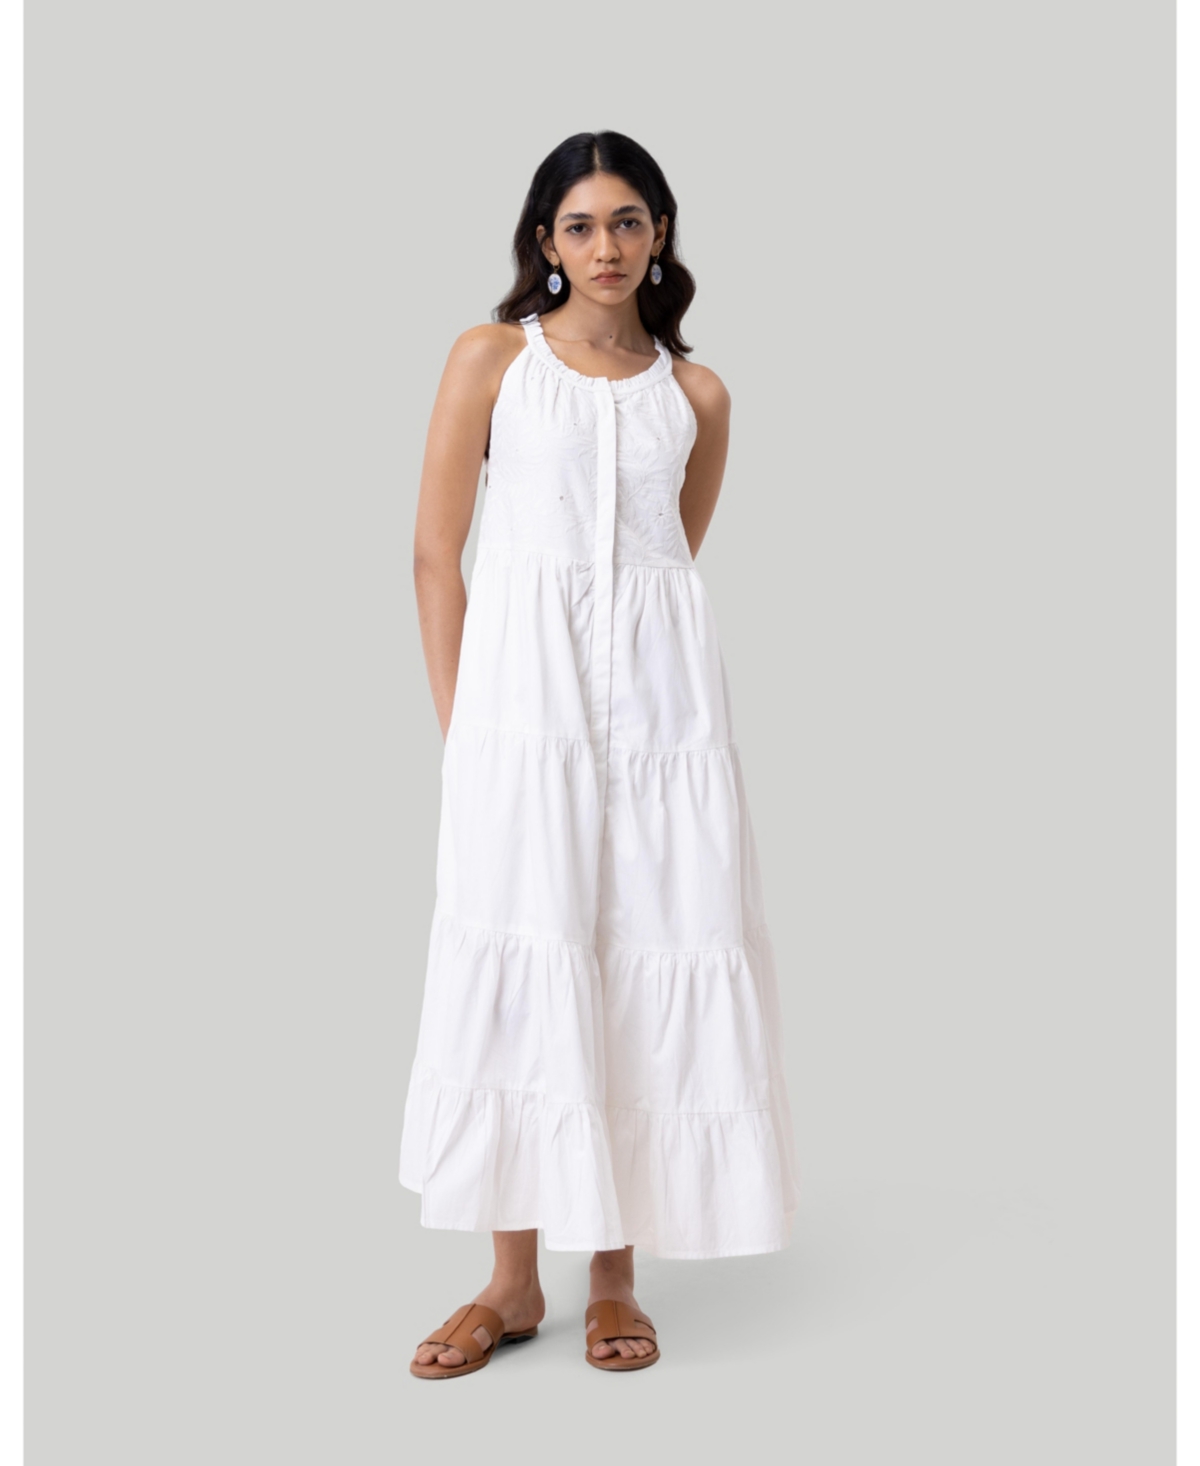 Women's Sleeveless embroidered tiered maxi dress - White